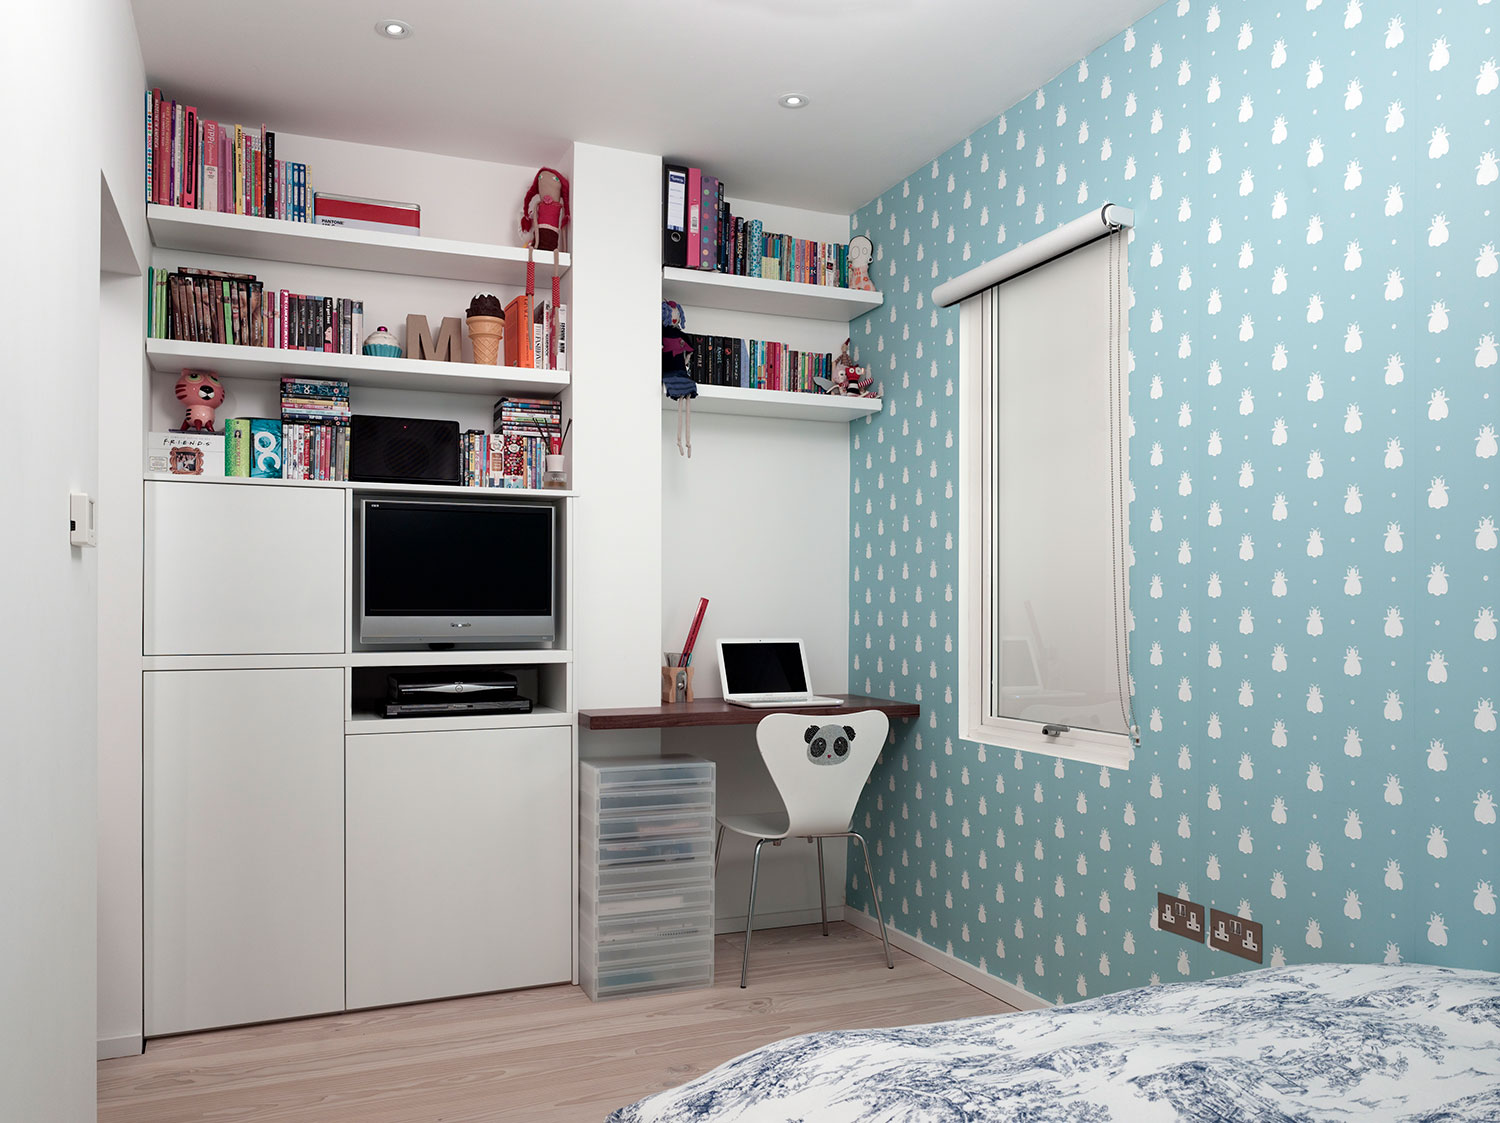 Interior design for a girl's bedroom